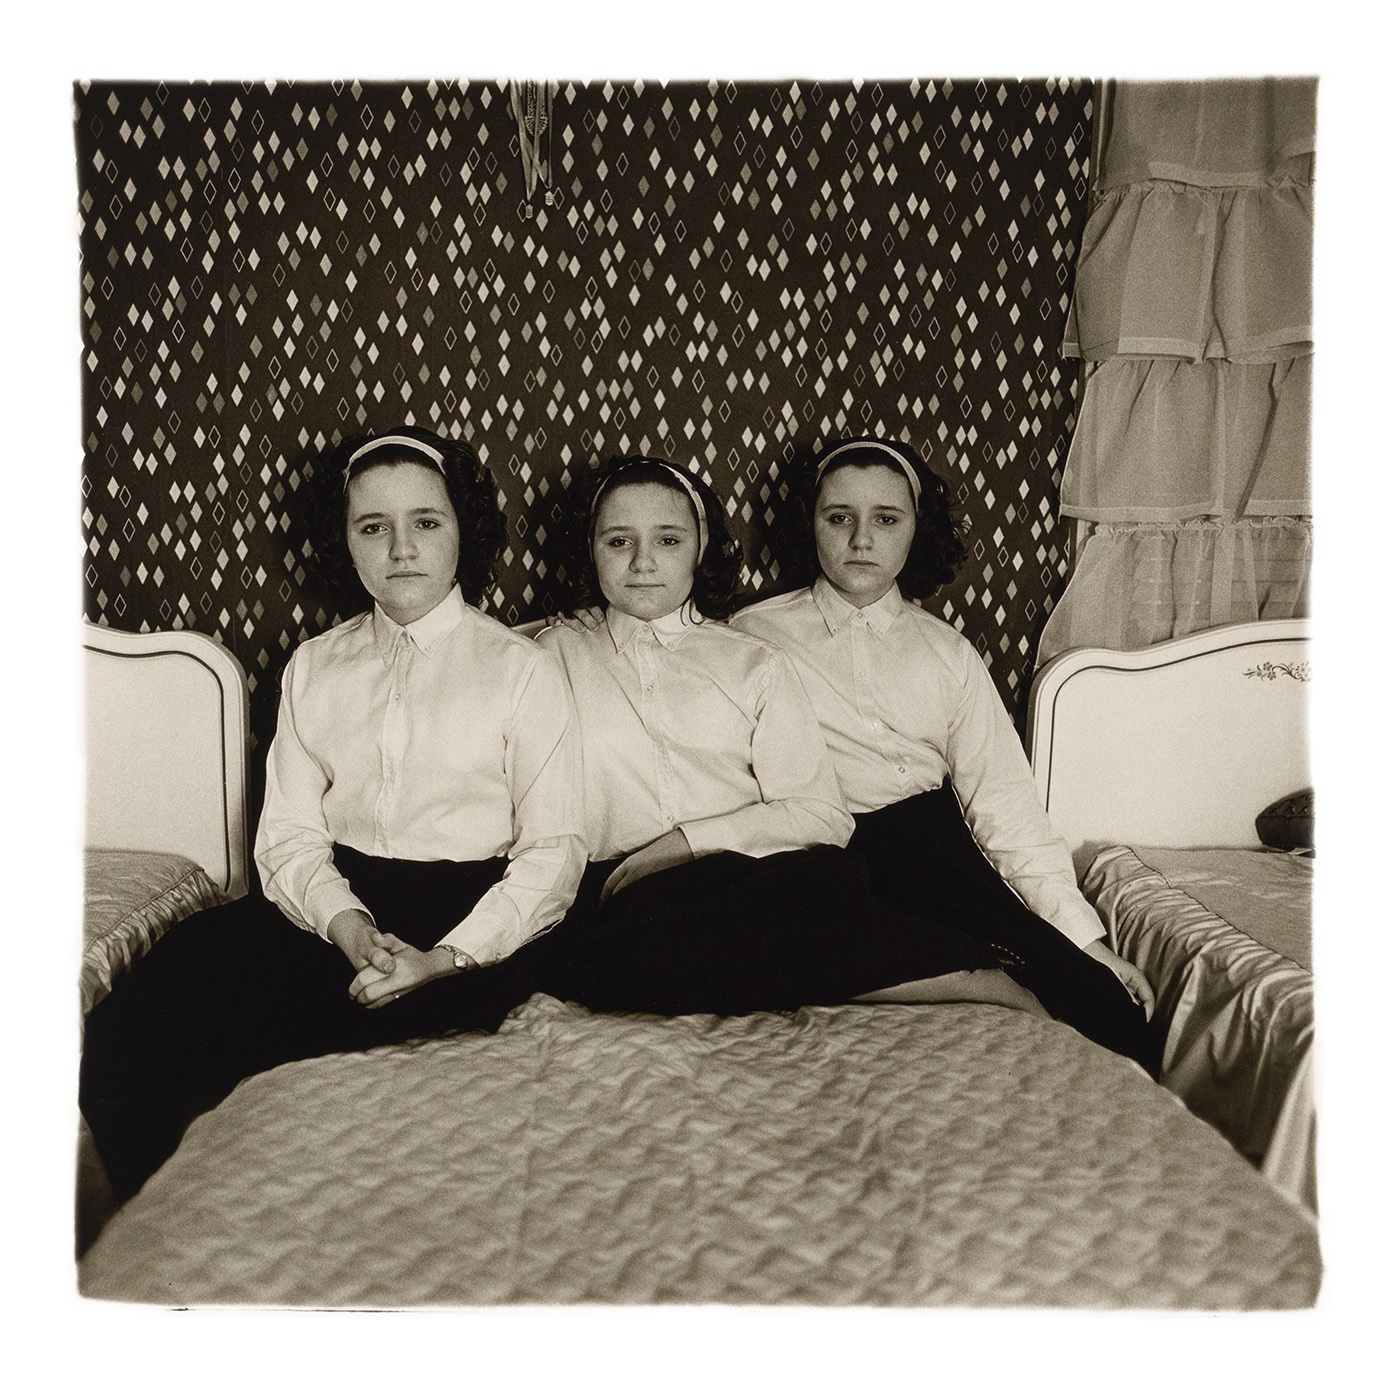 Triplets in their bedroom, 1963, Diane Arbus, © The Estate Diane Arbus. Courtesy the artist and David Zwirner.